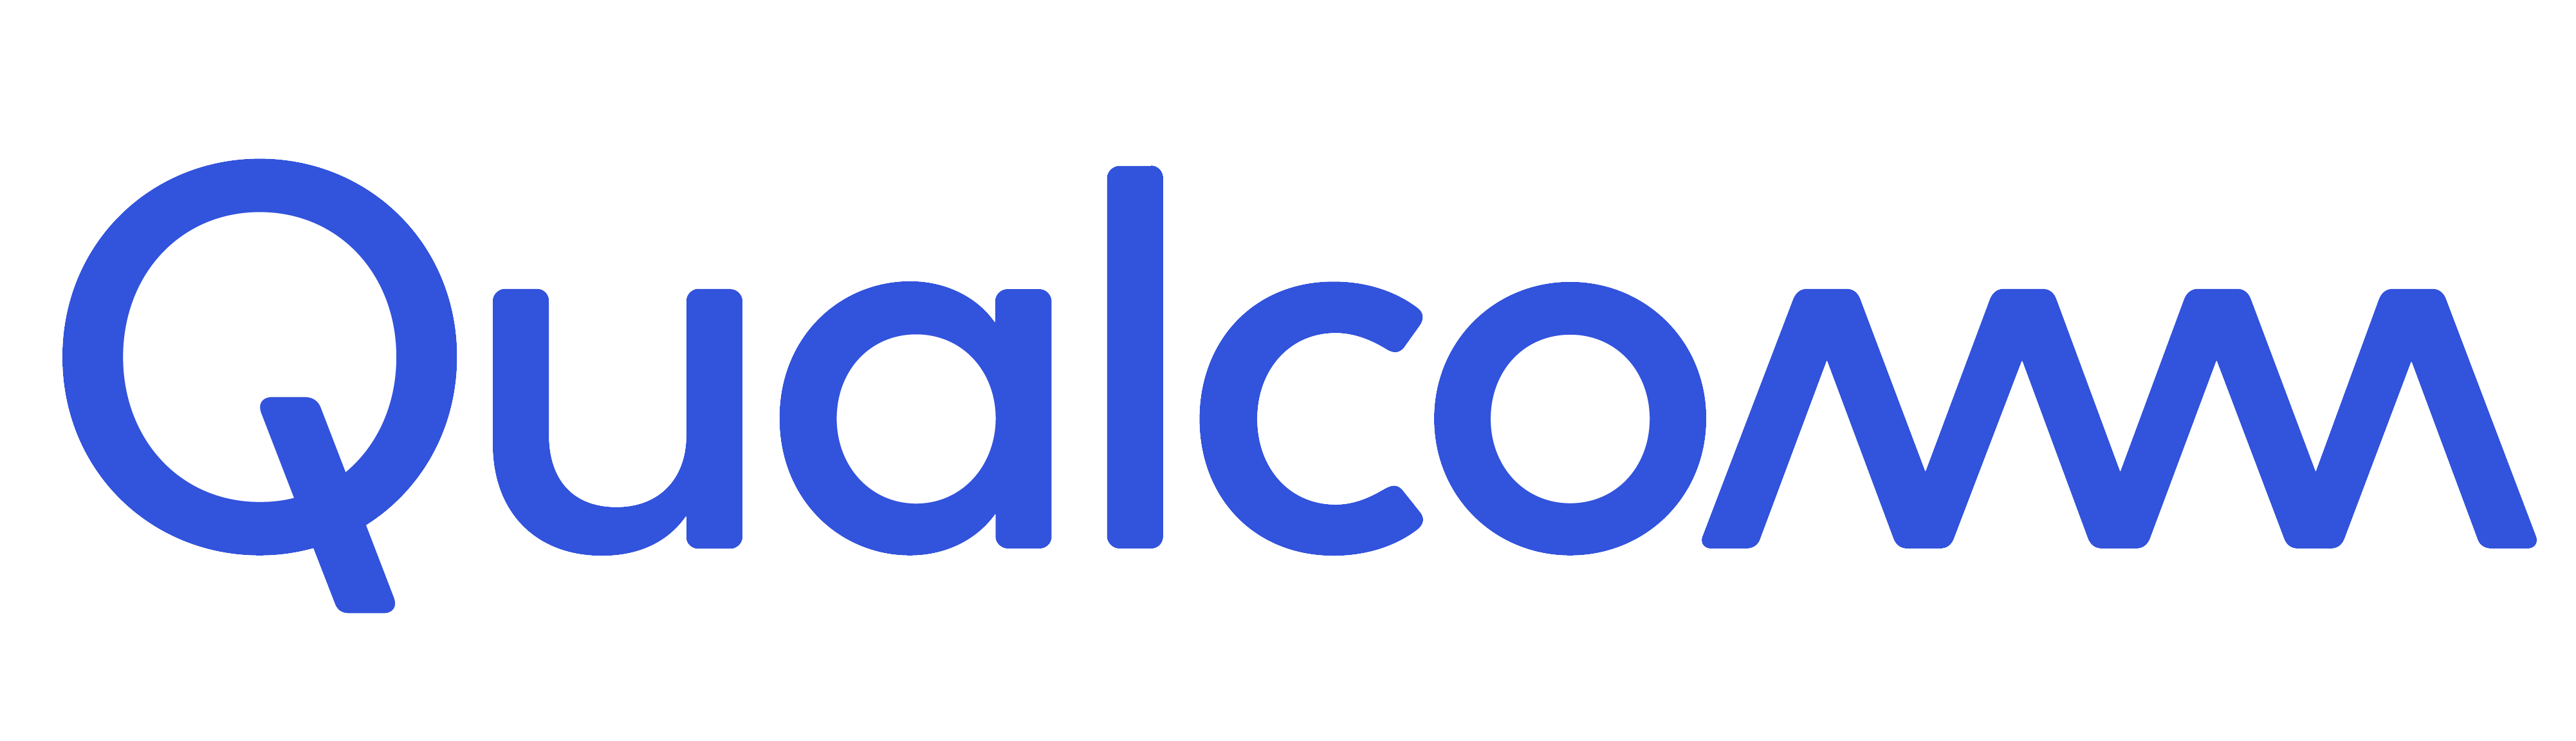 Qualcomm-Logo-cropped.png